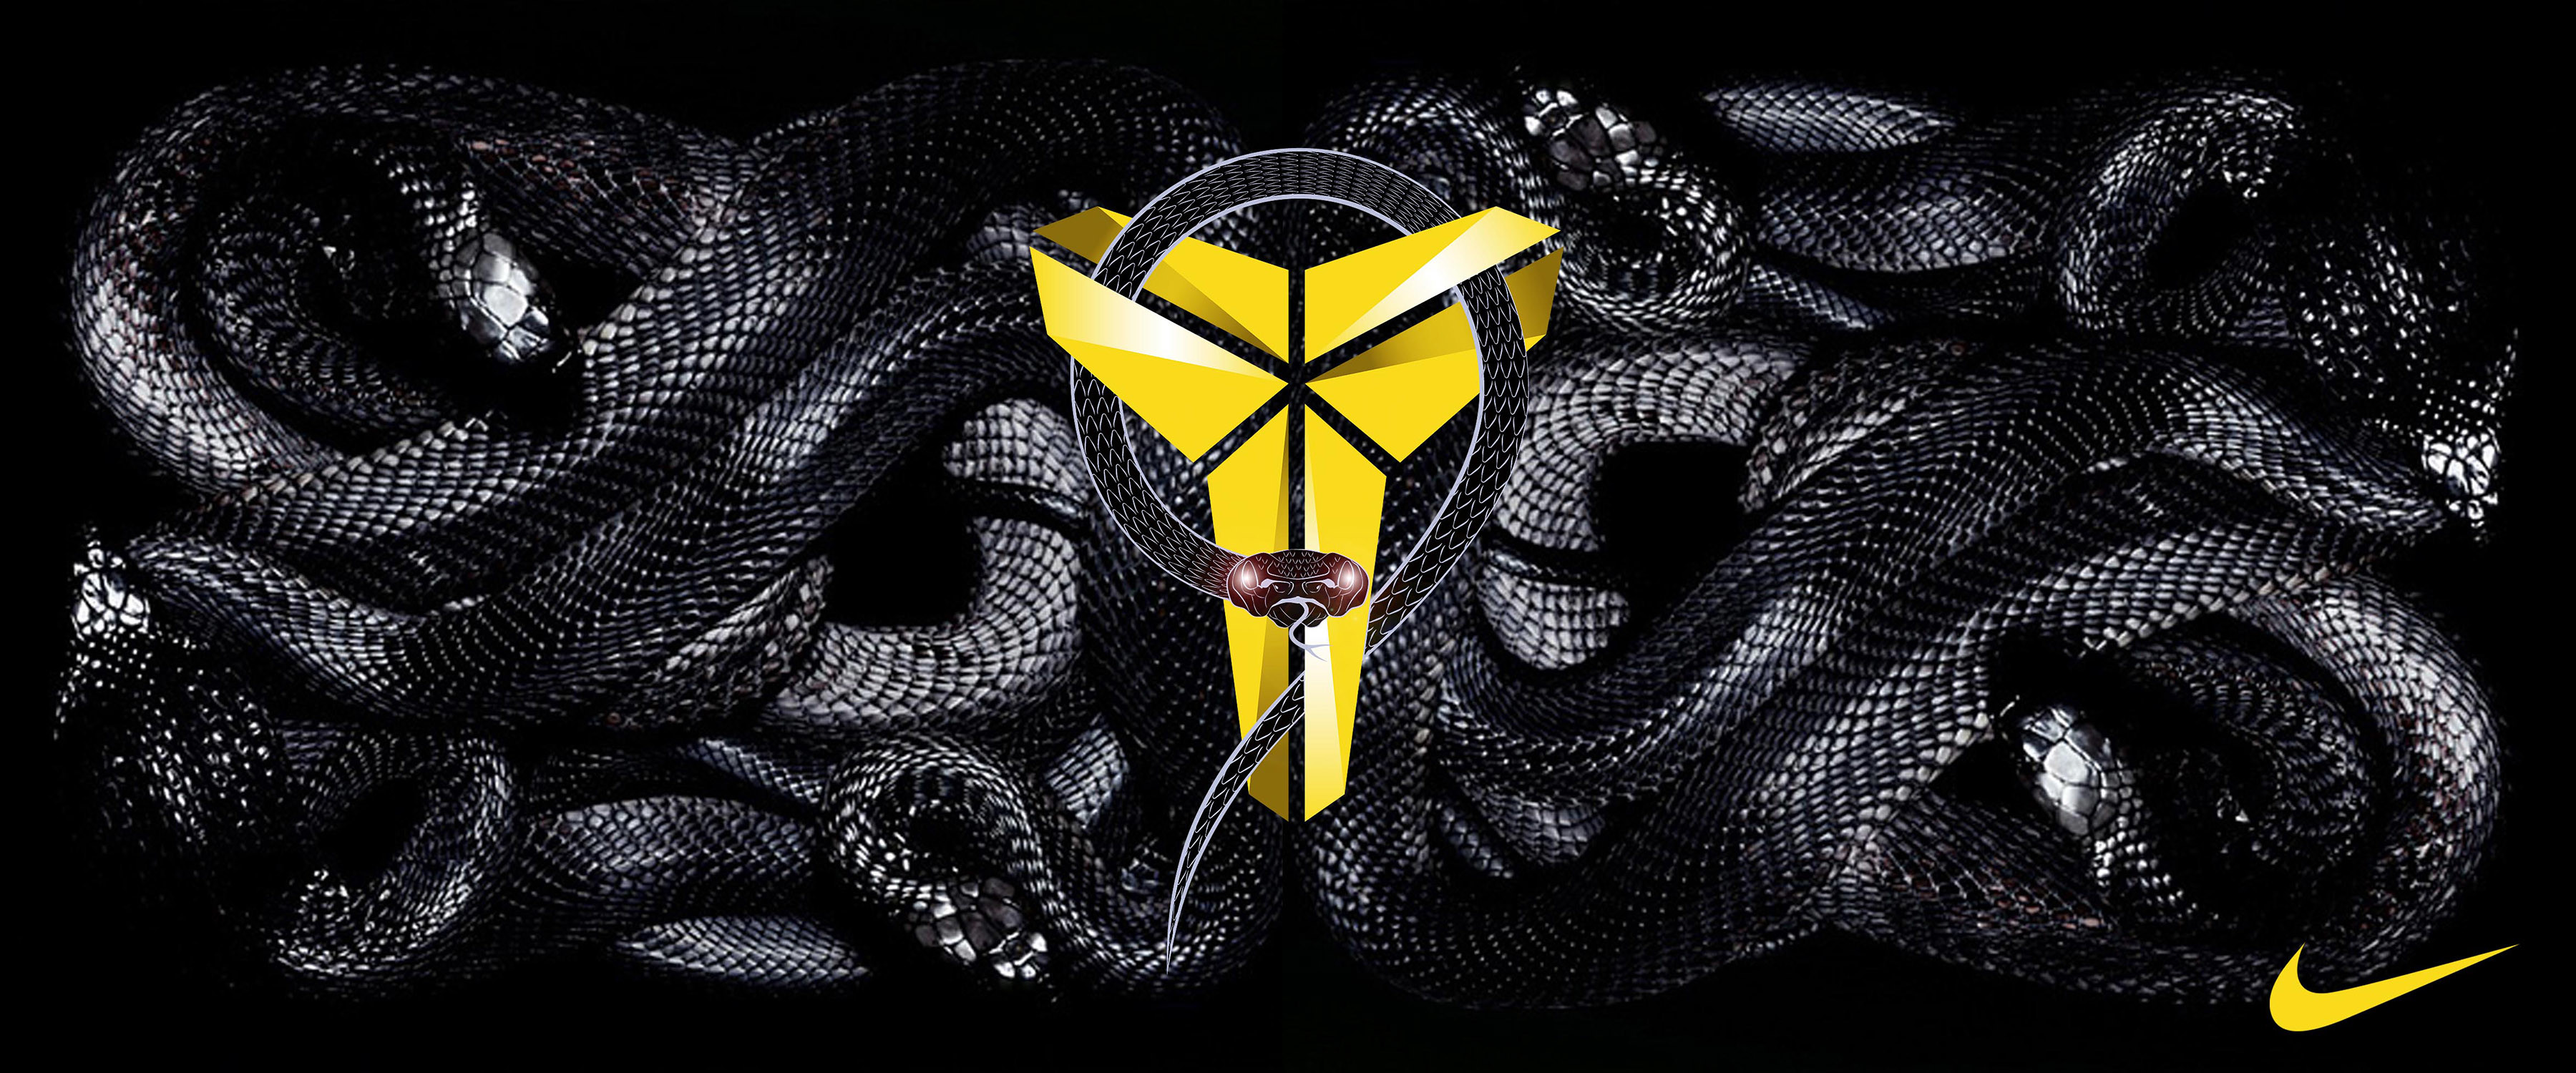 3600x1500 Search Results for “black mamba logo wallpaper hd” – Adorable Wallpapers